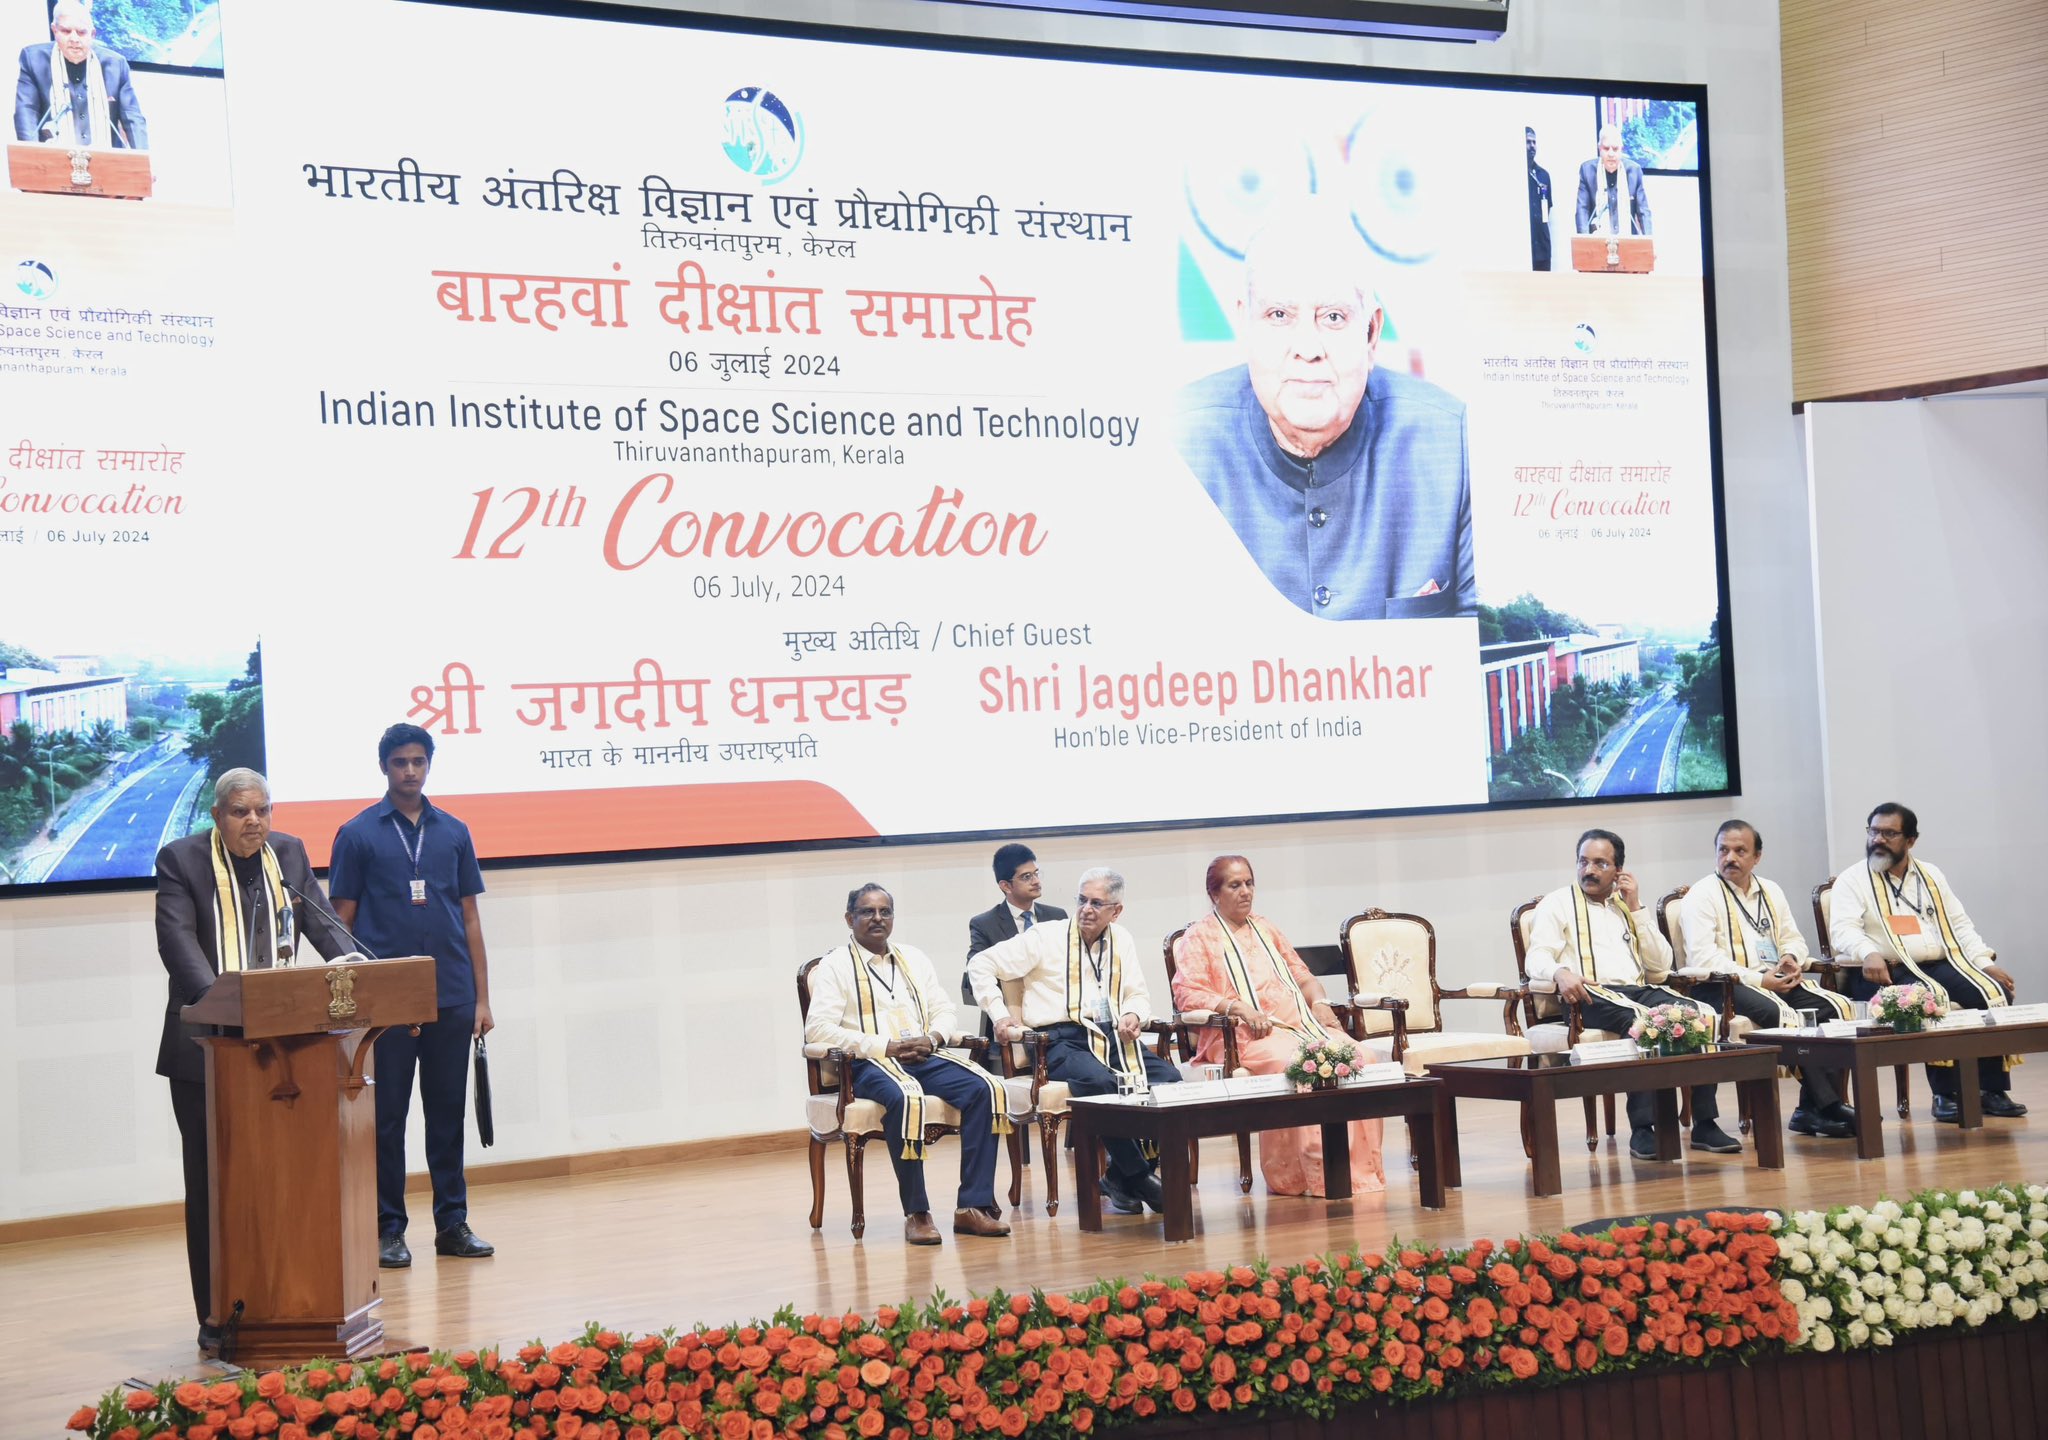 The Vice-President, Shri Jagdeep Dhankhar addressing the students and faculty members at the 12th Convocation of Indian Institute of Space Science and Technology in Thiruvananthapuram, Kerala on July 6, 2024.